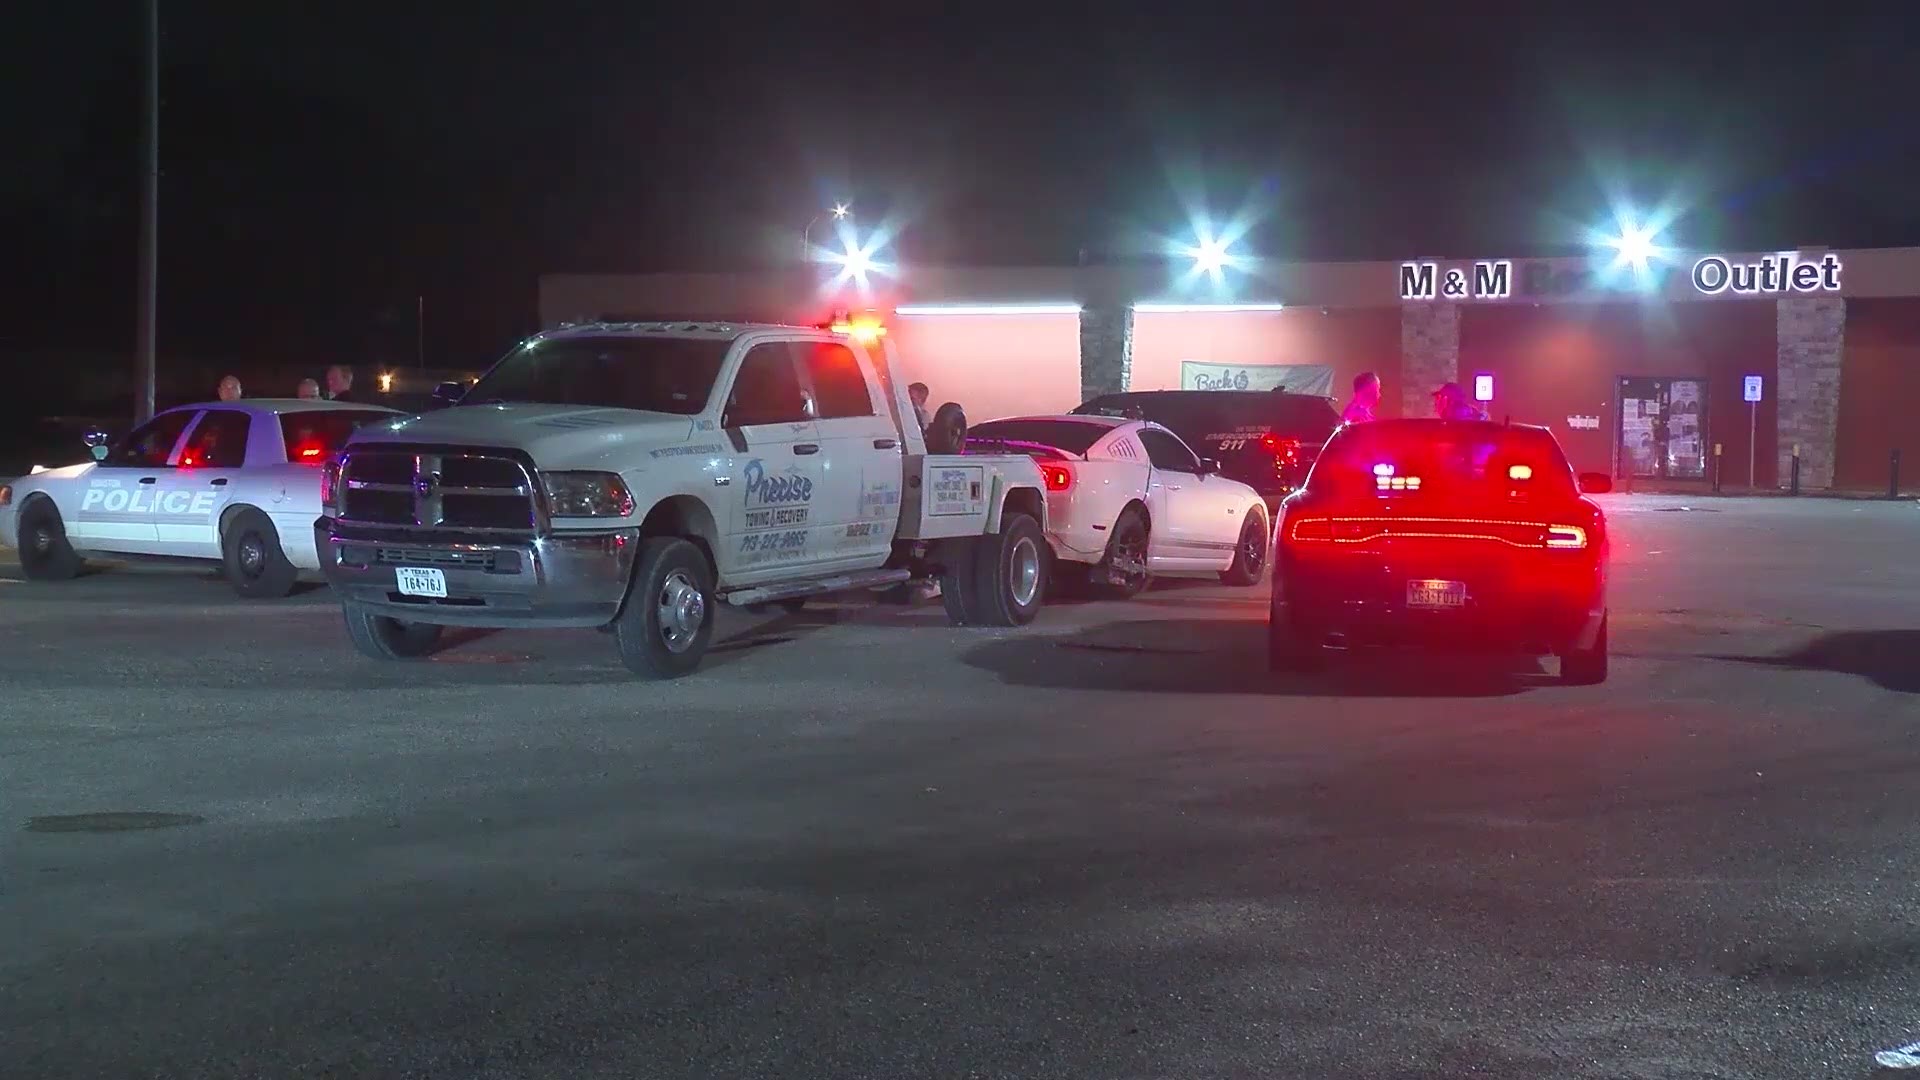 Several people were arrested after an investigation into illegal street racing across Houston area.